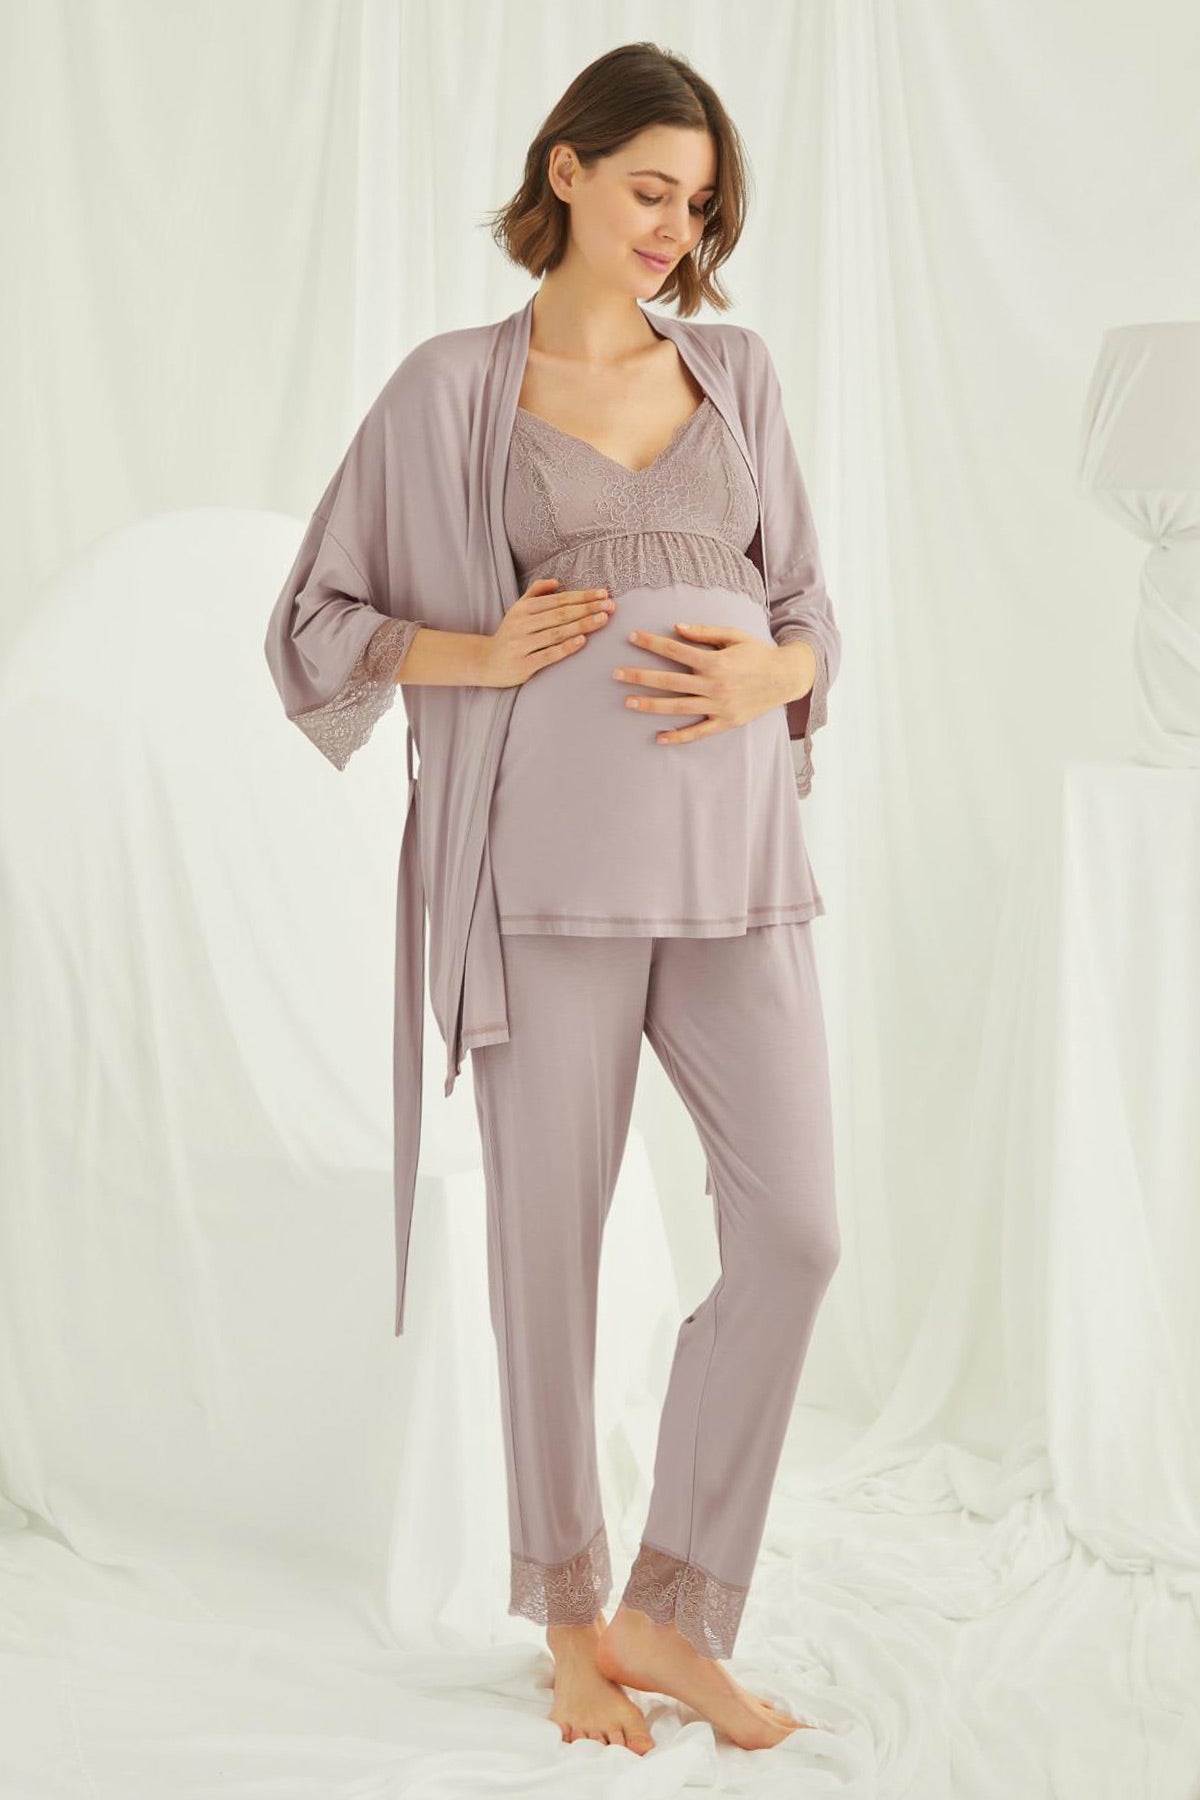 Lace Strappy 4 Pieces Maternity & Nursing Set Coffee - 431490